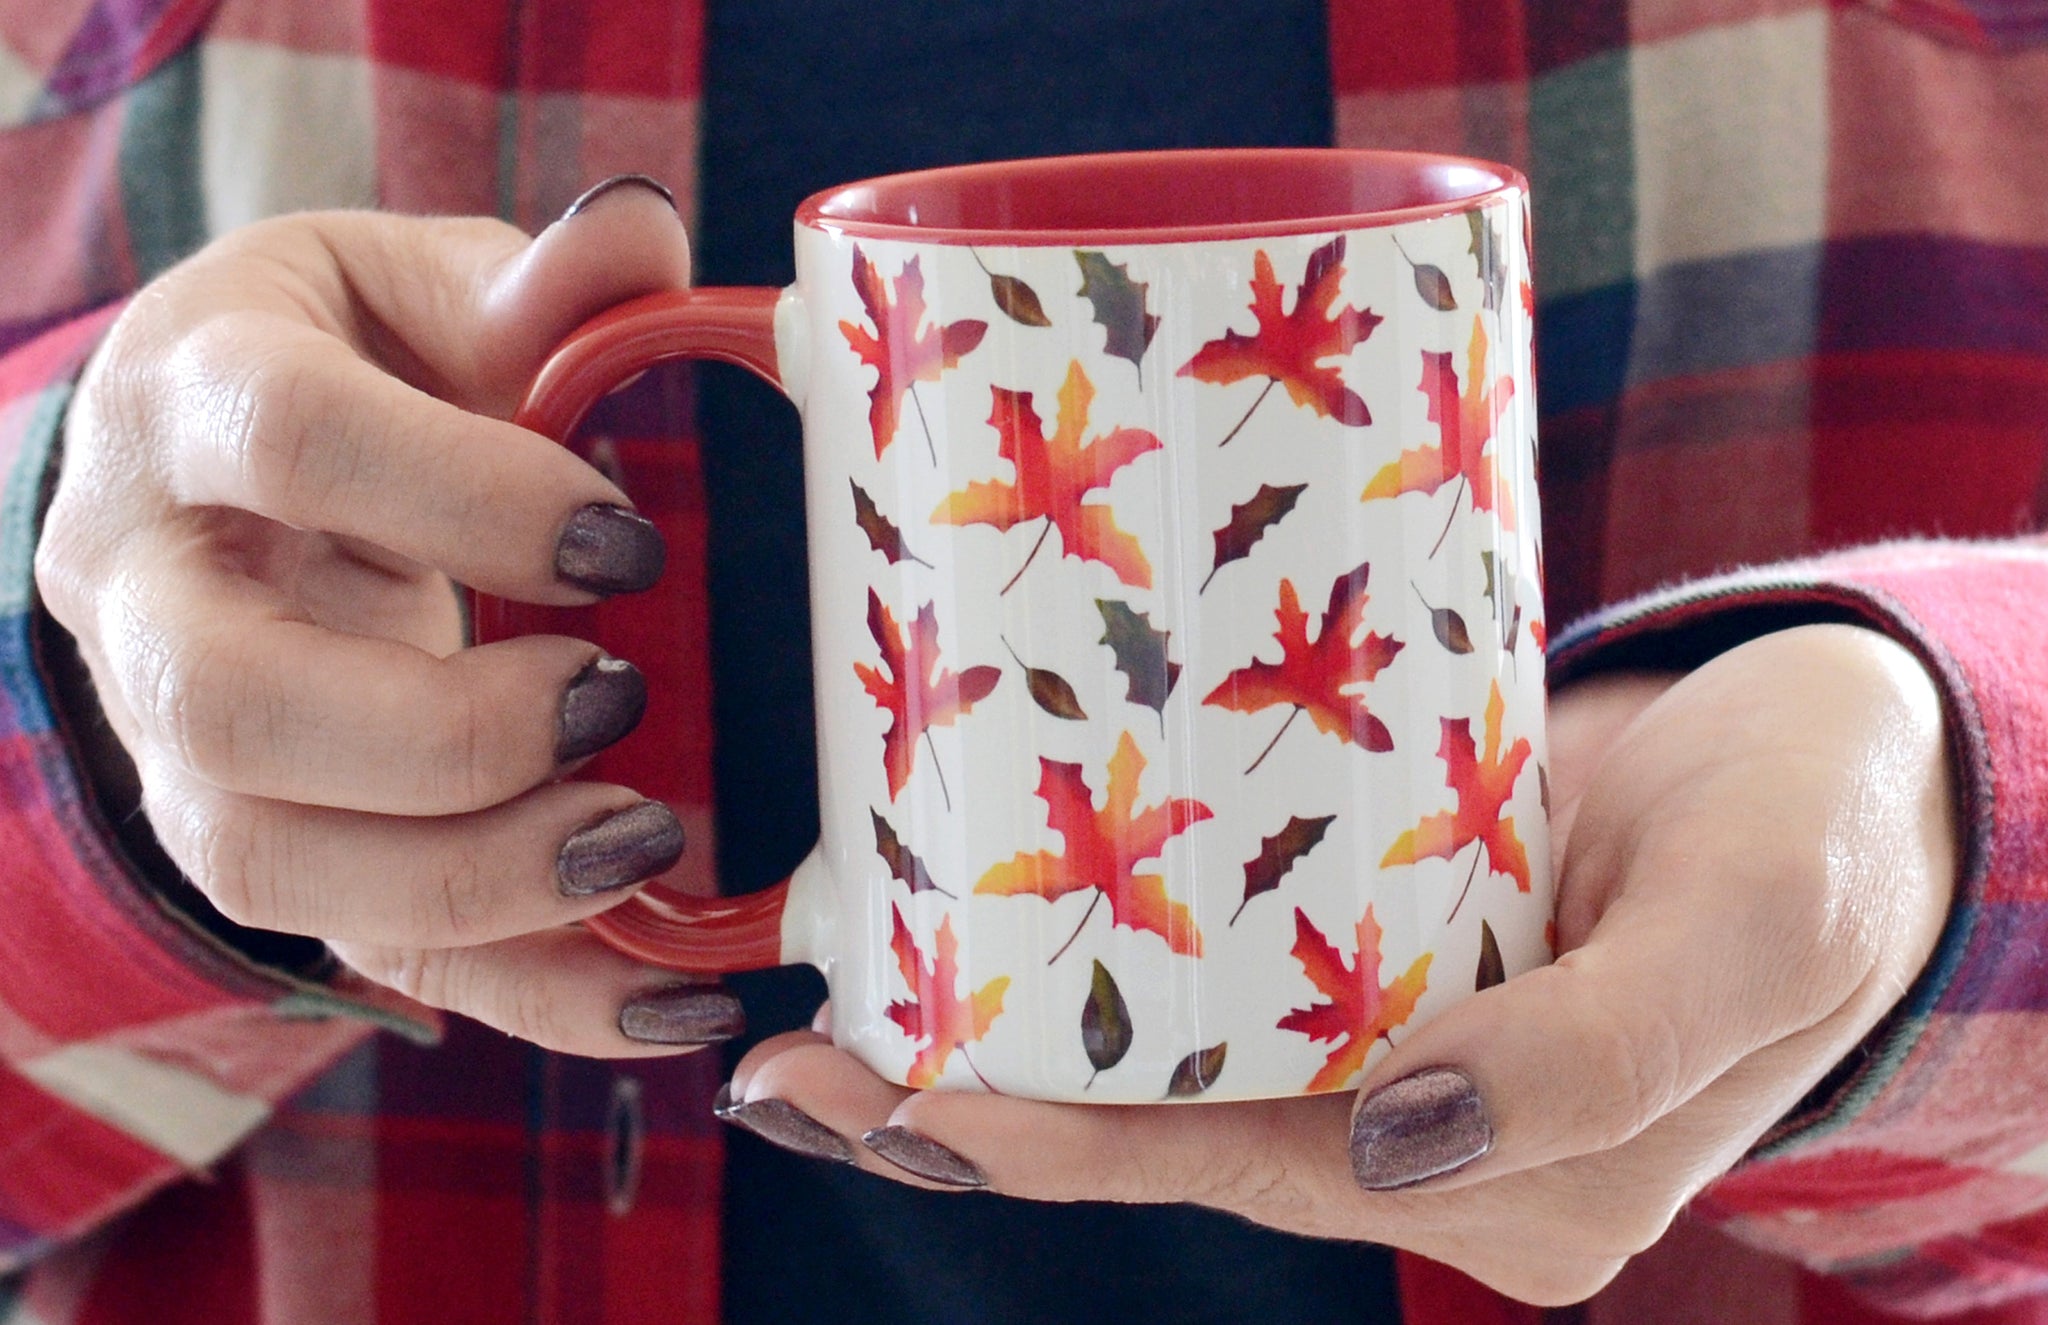 ceramic mug with red handle and interior pattern is hand painted fall leaves  illustrations on white background